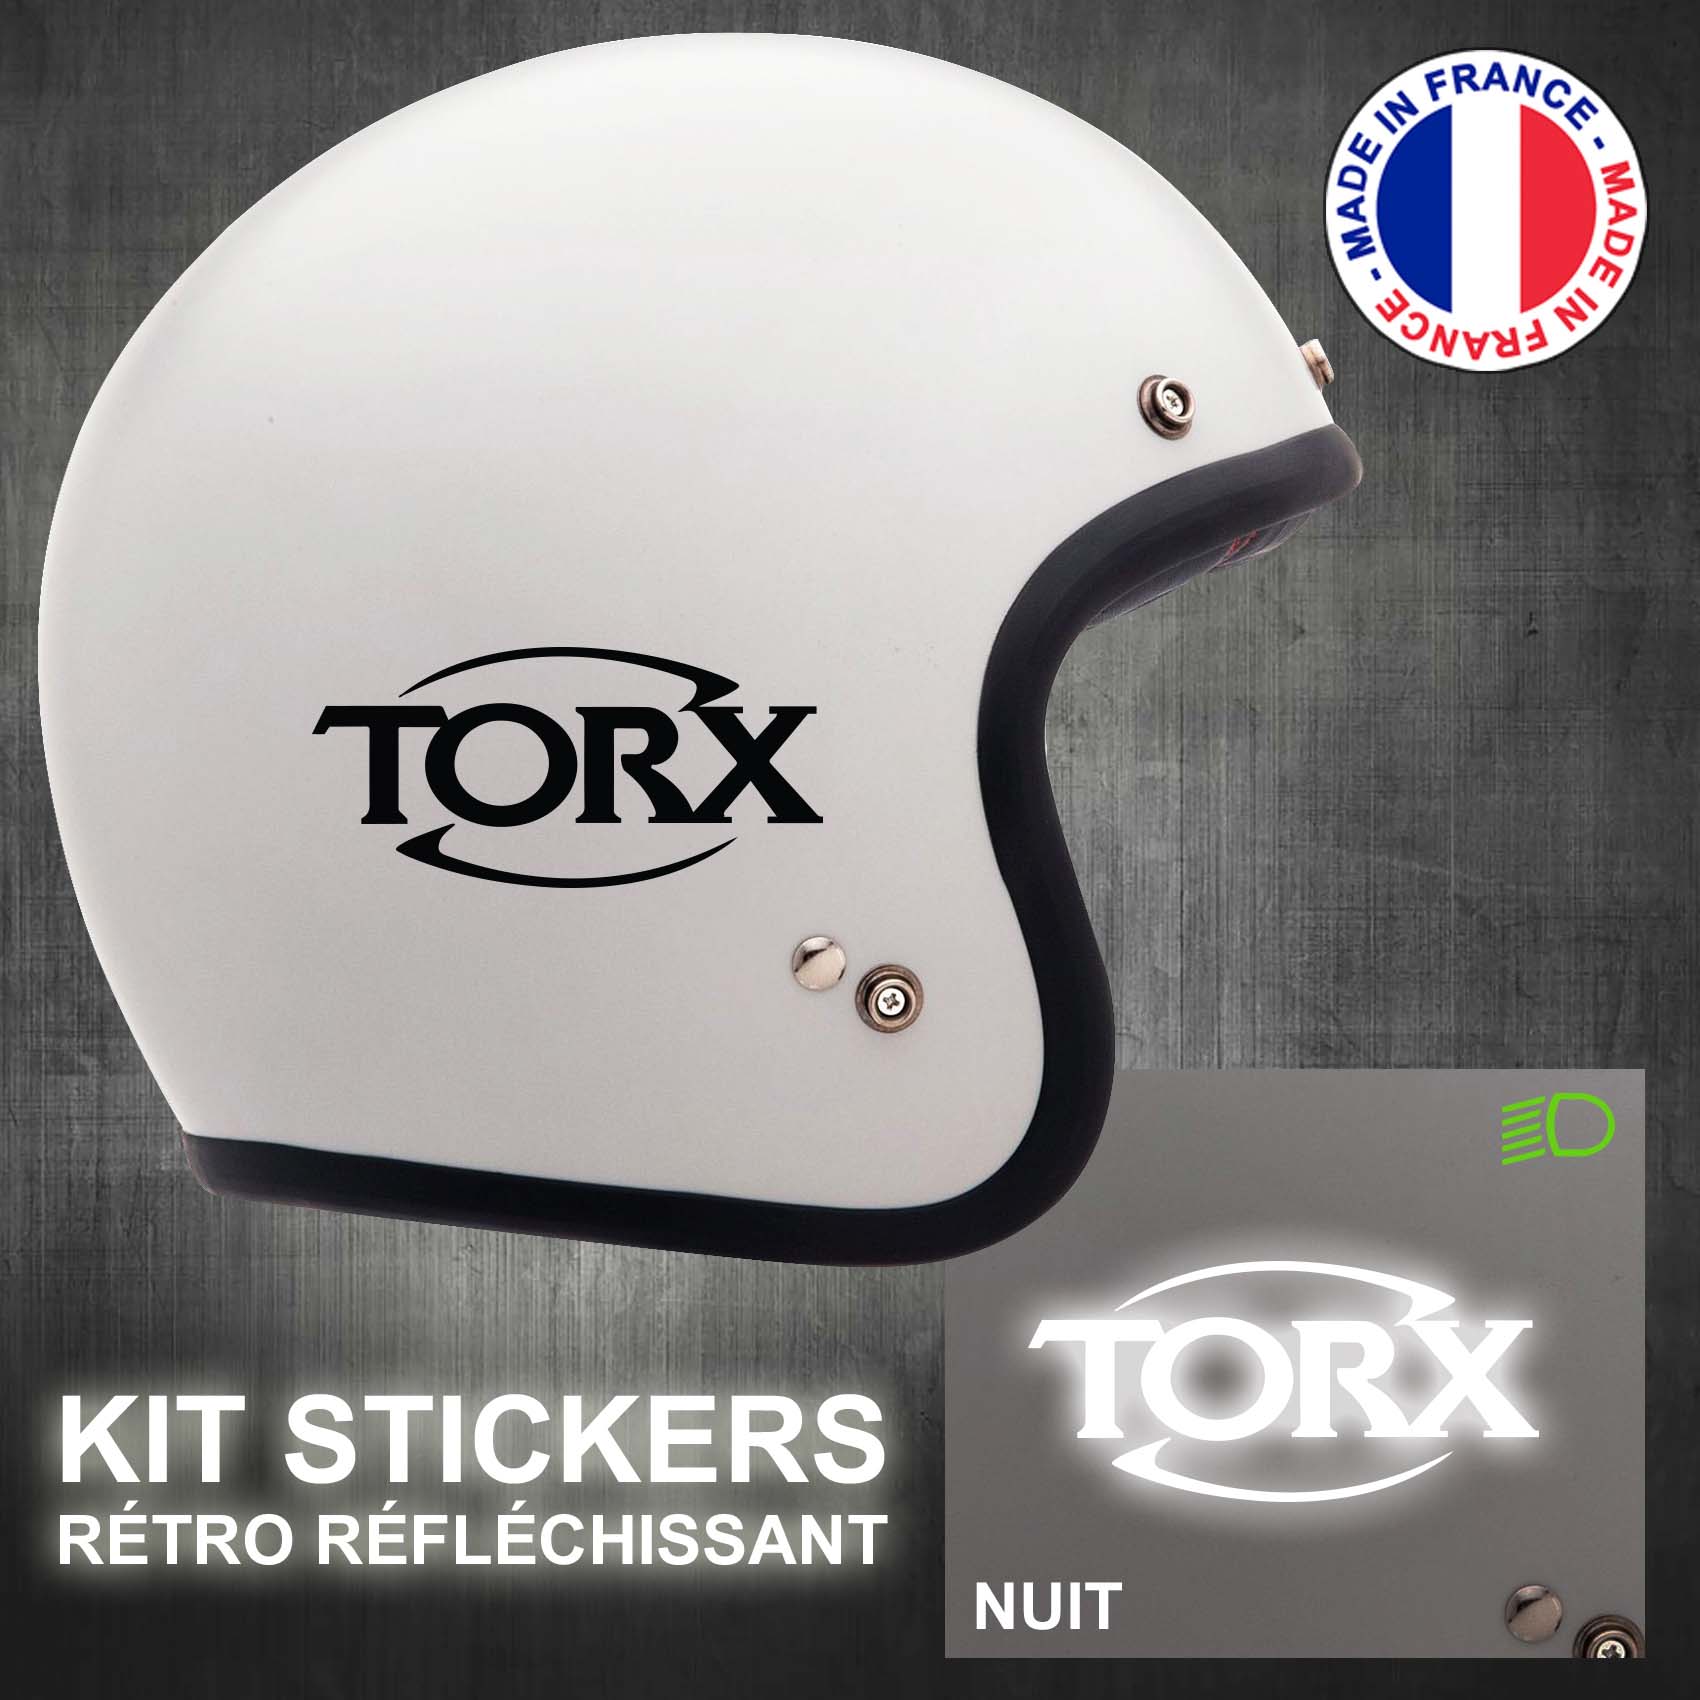 stickers-casque-moto-torx-ref3-retro-reflechissant-autocollant-blanc-moto-velo-tuning-racing-route-sticker-casques-adhesif-scooter-nuit-securite-decals-personnalise-personnalisable-min